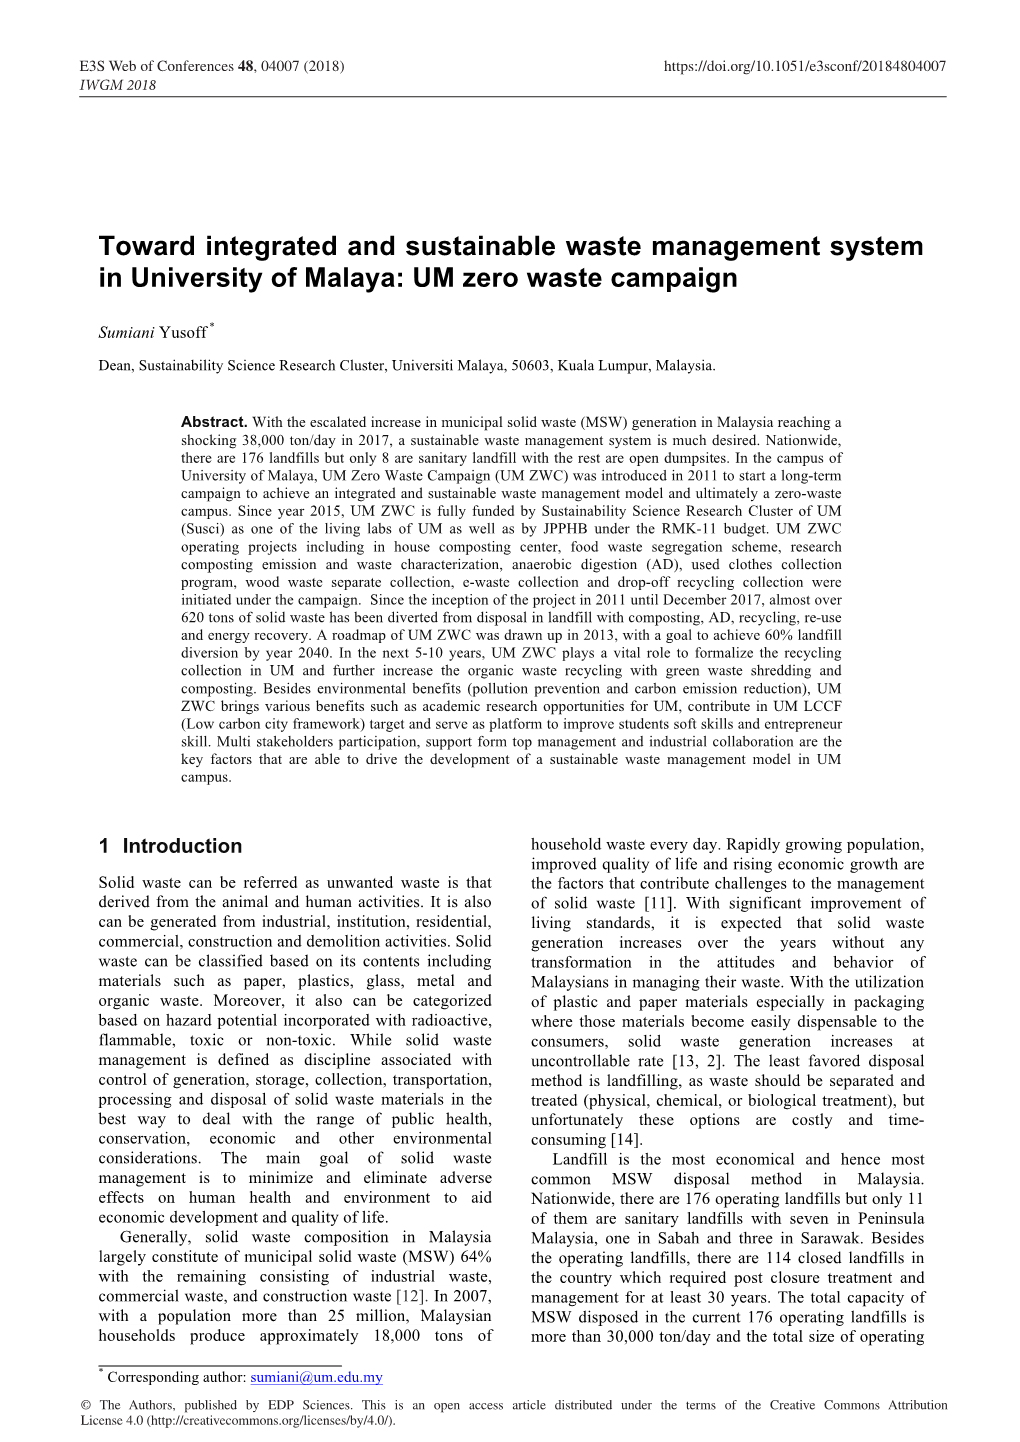 Toward Integrated and Sustainable Waste Management System in University of Malaya: UM Zero Waste Campaign